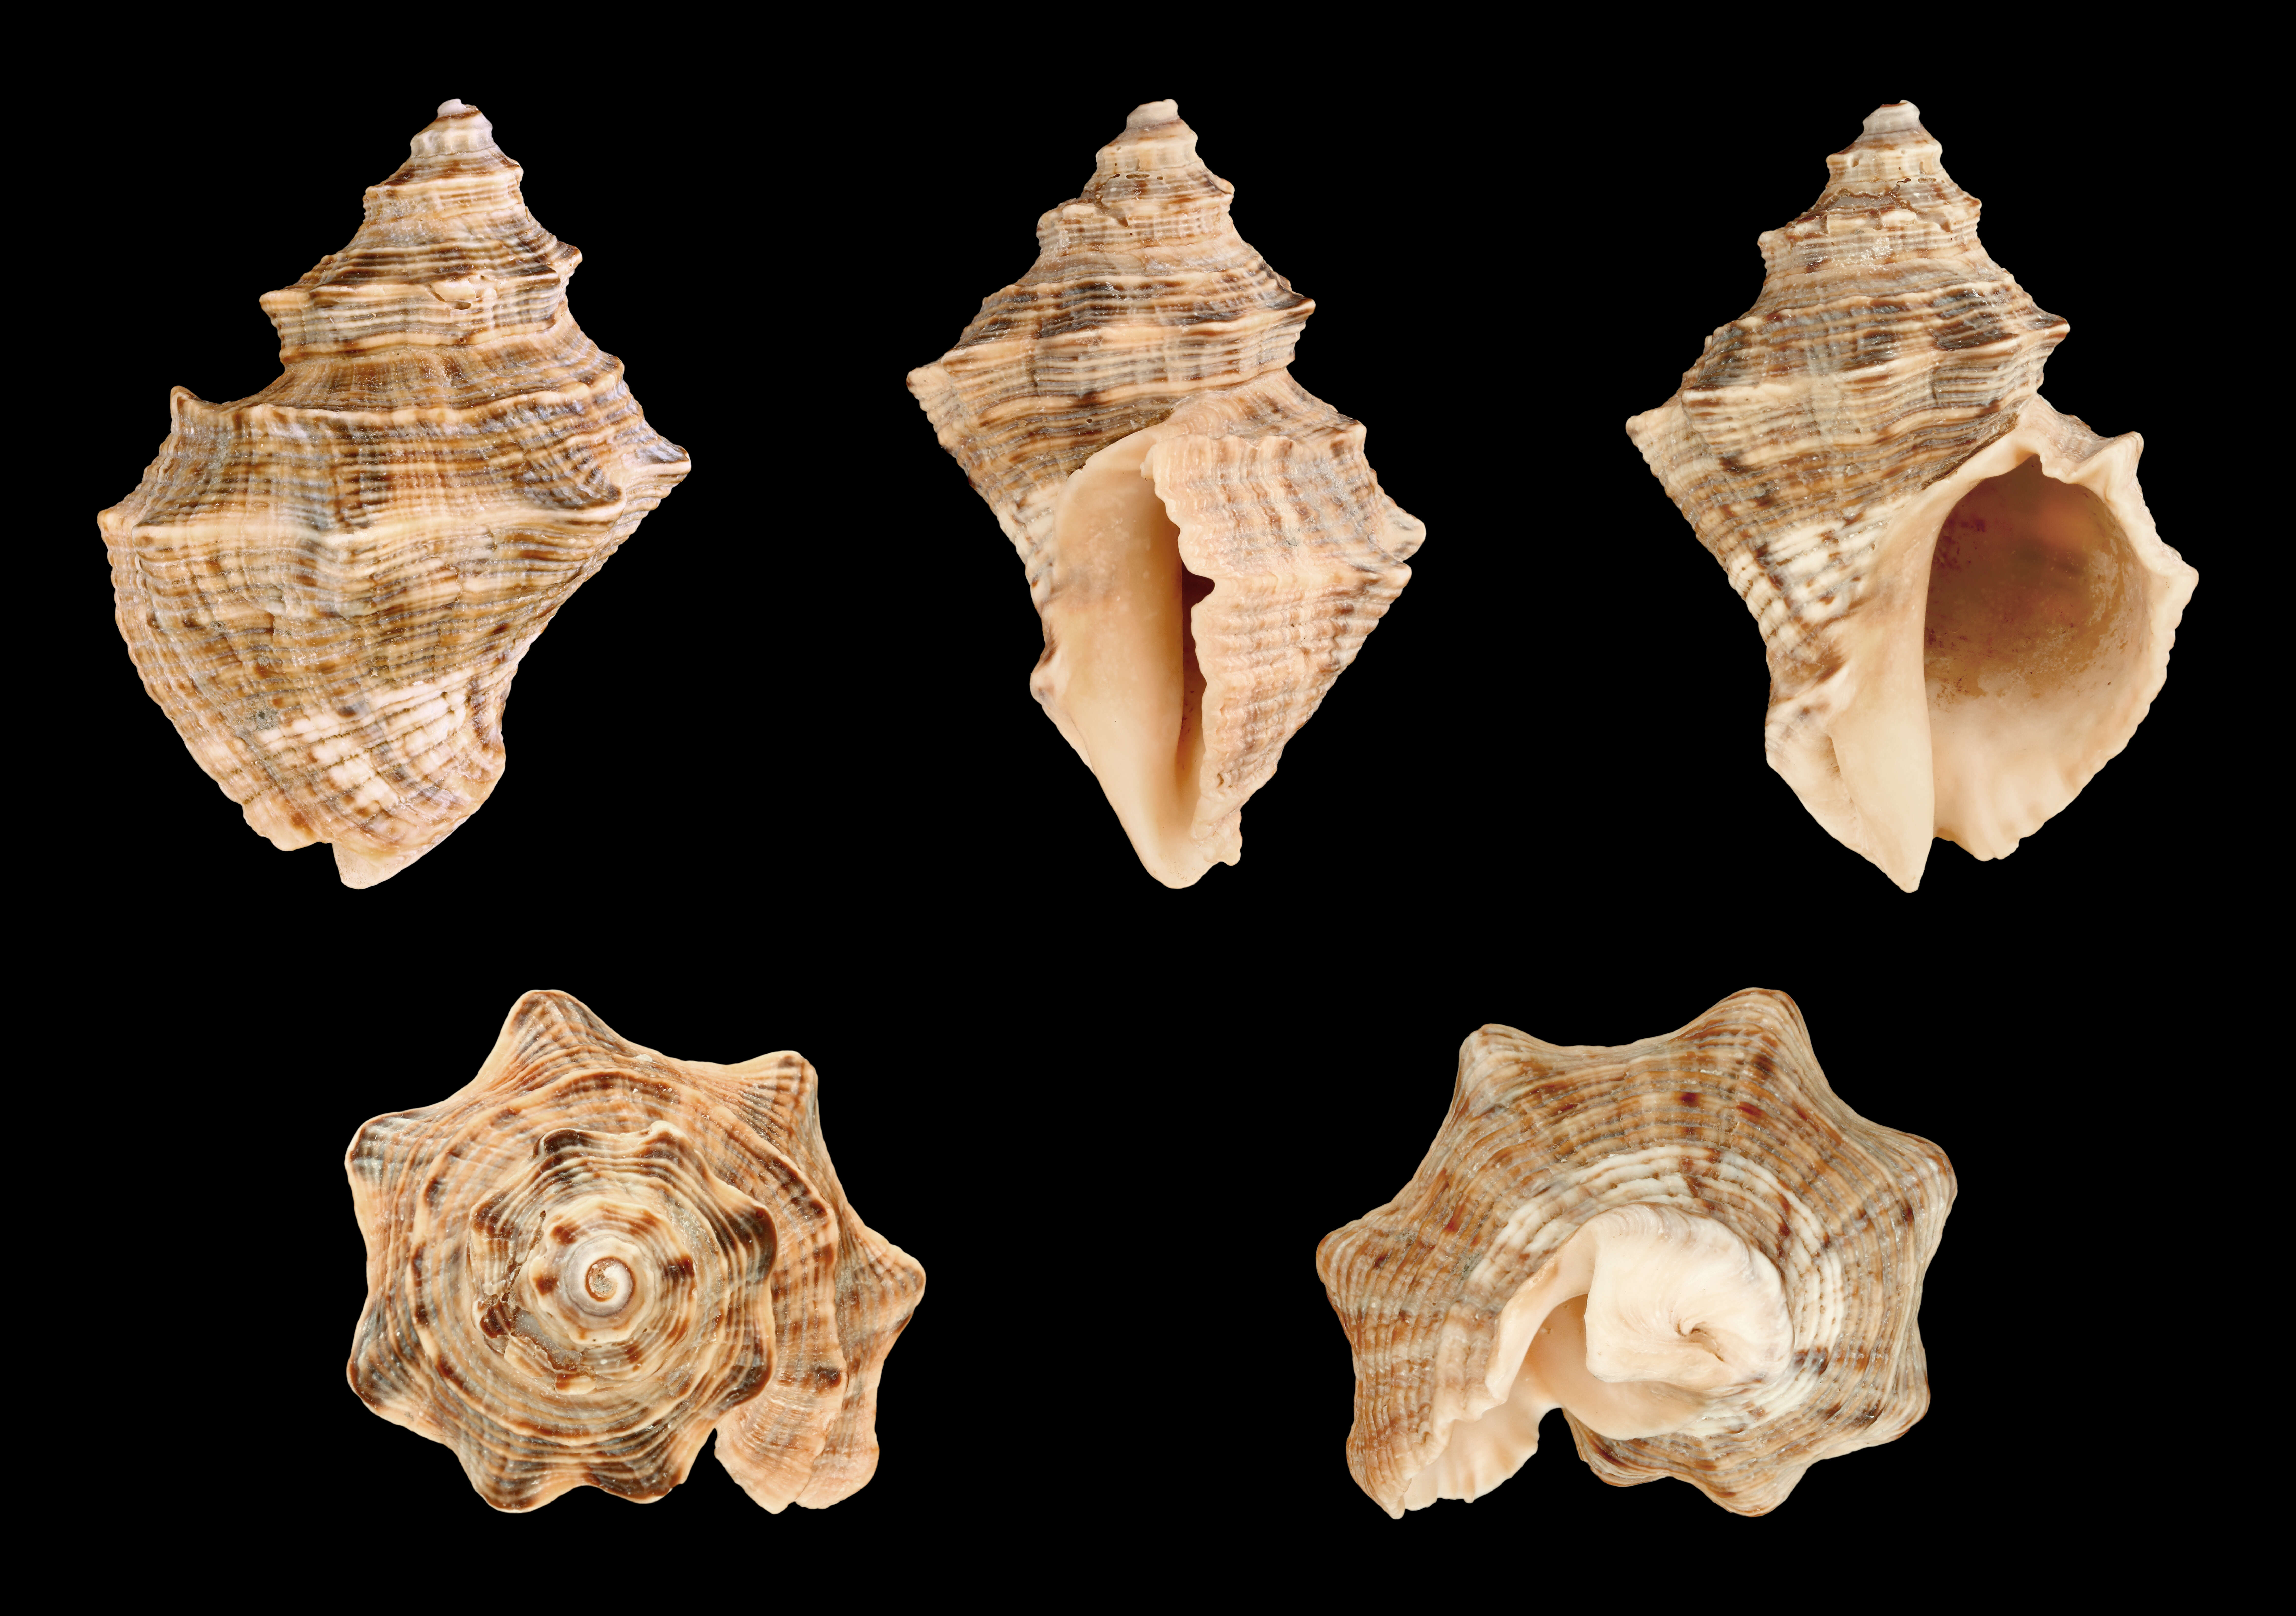 Image of carinate rock shell